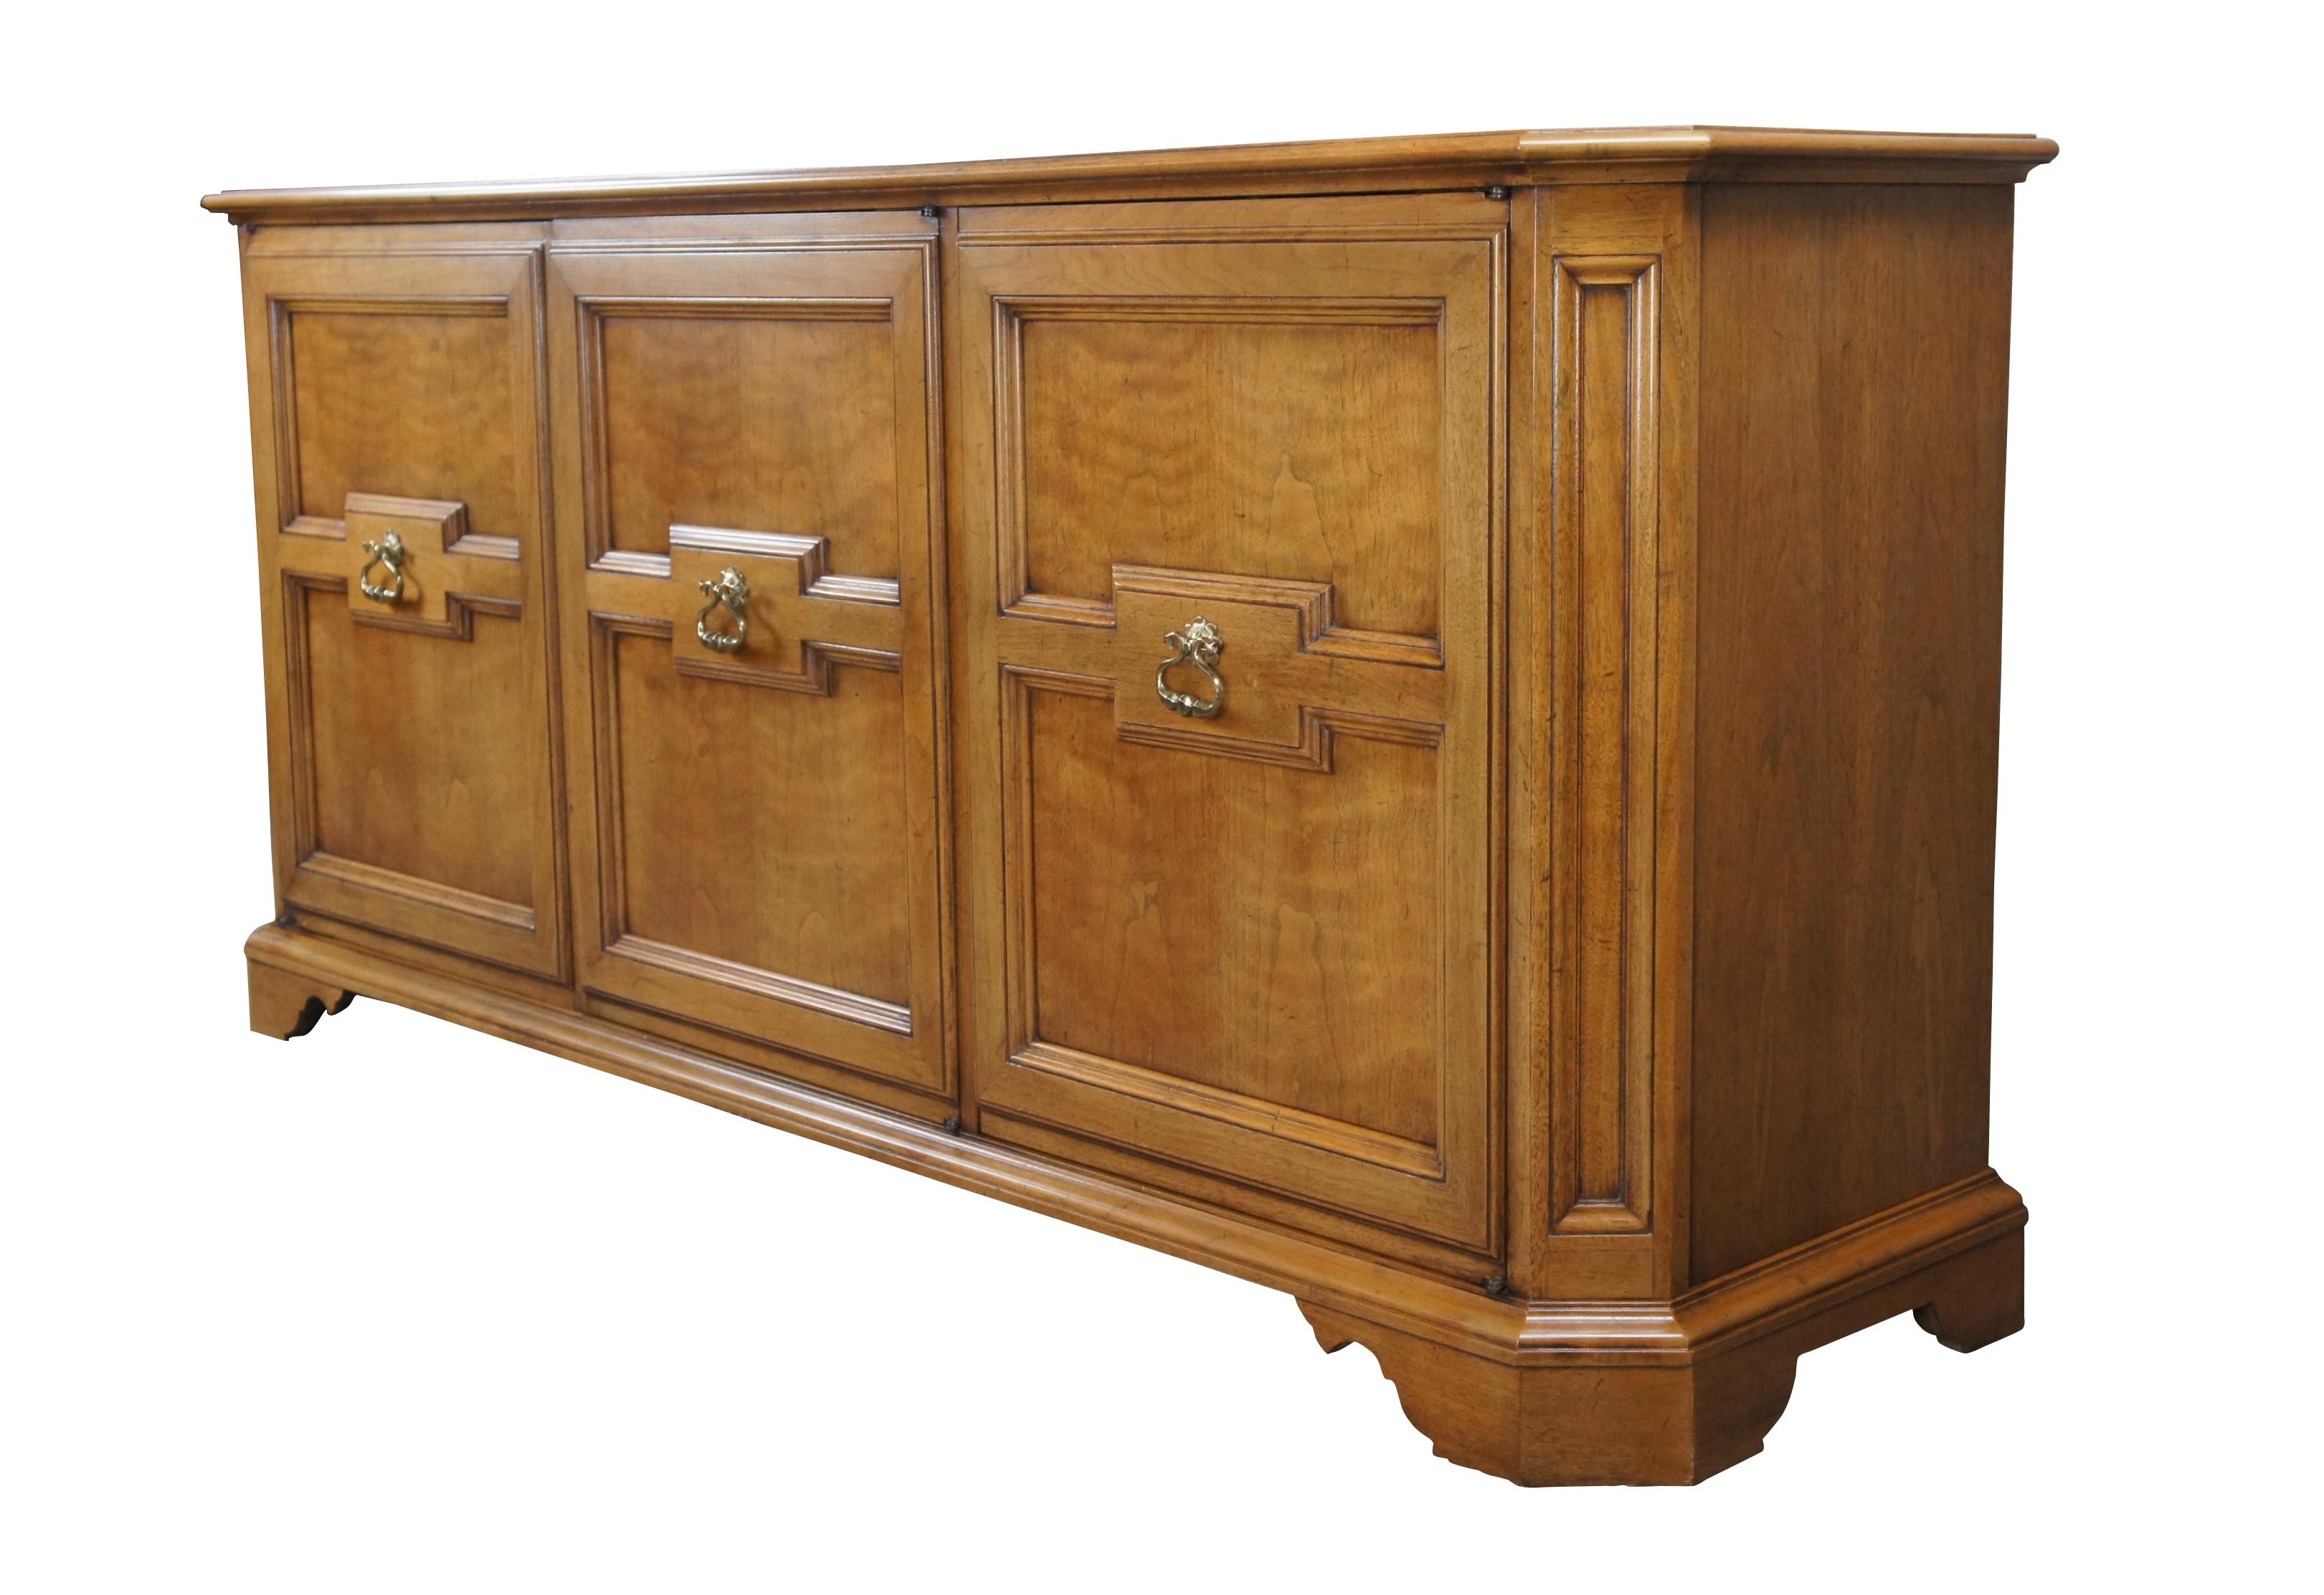 Baker Furniture Milling Road Sideboard, circa 1960s. A rectangular form made from walnut with chamfered corners. The case is fitted with 3 large doors having Italian Neoclassical and Tuscan style paneling. The cabinet opens via brass pulls to a